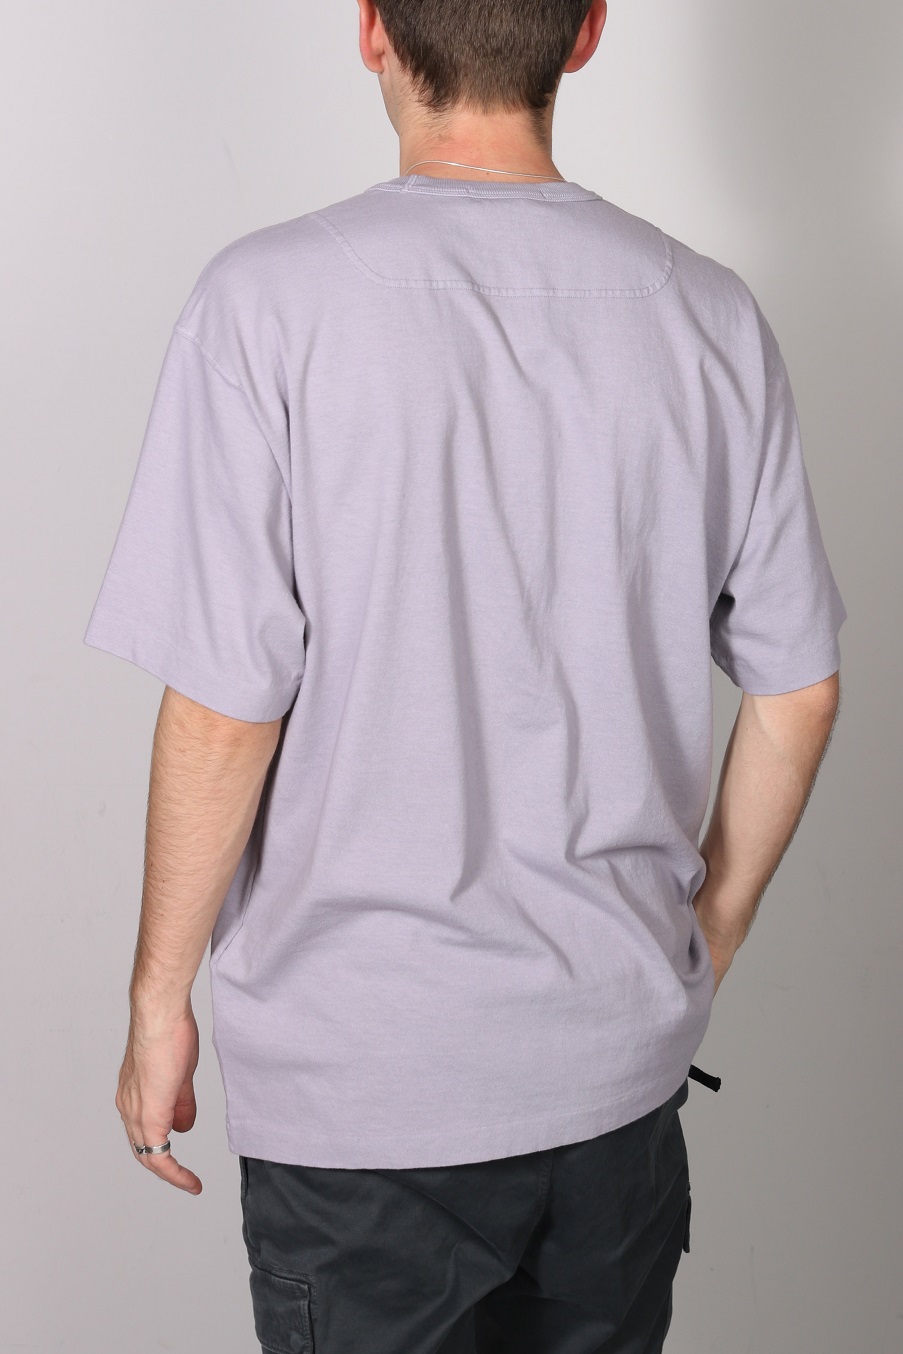 STONE ISLAND Oversized Stamp T-Shirt in Lavender L